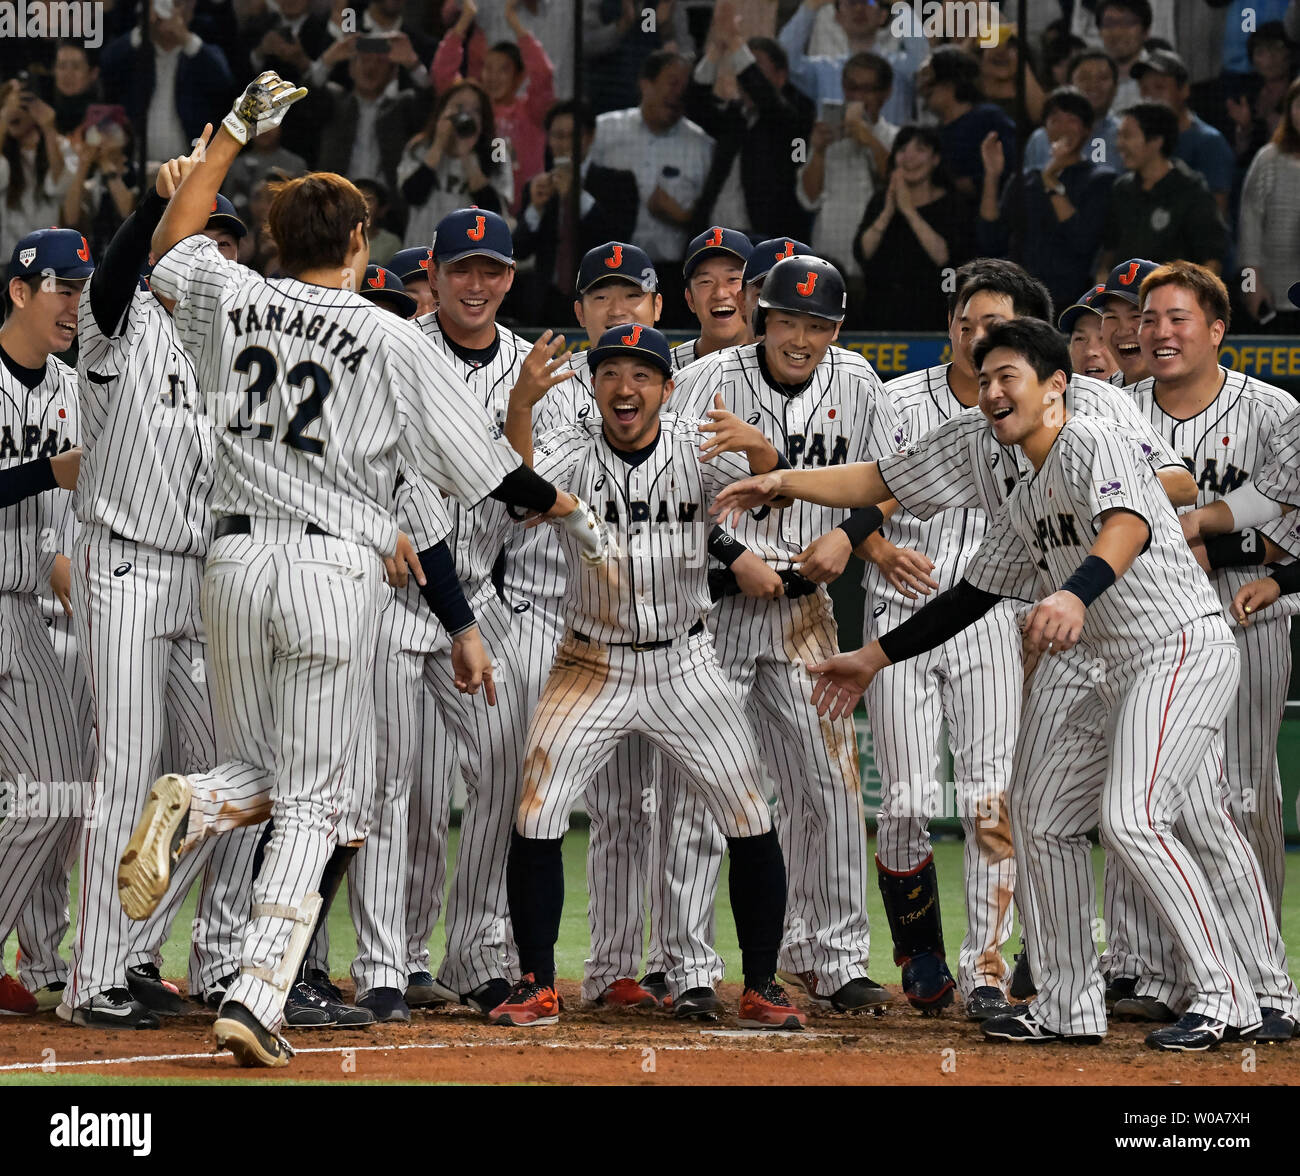 Yanagita Yuki (22), center fielder of the Japan's national team celebrates  with his teammates after his walk off home run in an exhibition game  matching Japan's national team and MLB all stars